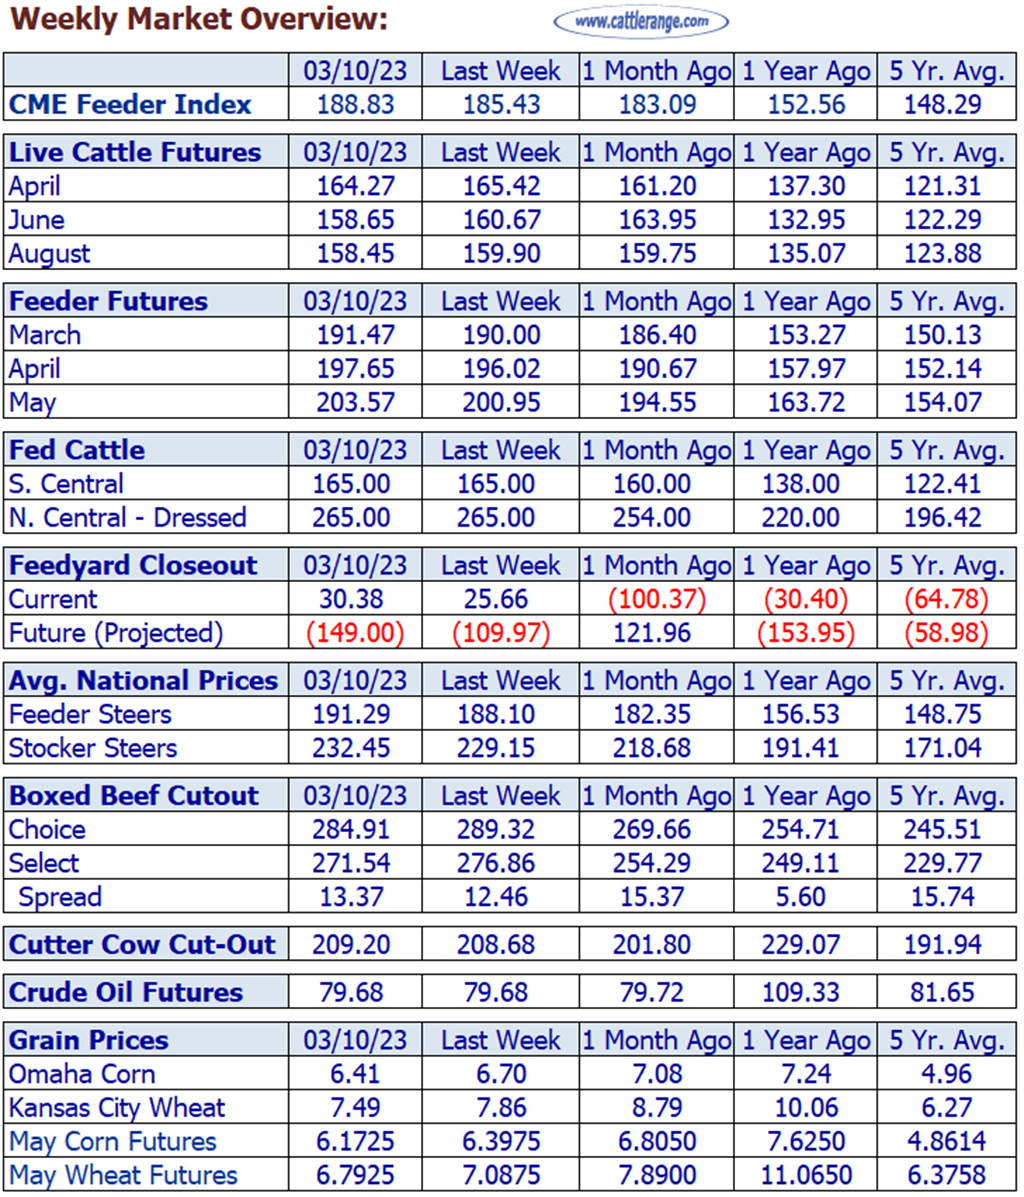 Weekly Cattle Market Overview for Week Ending 3/10/23